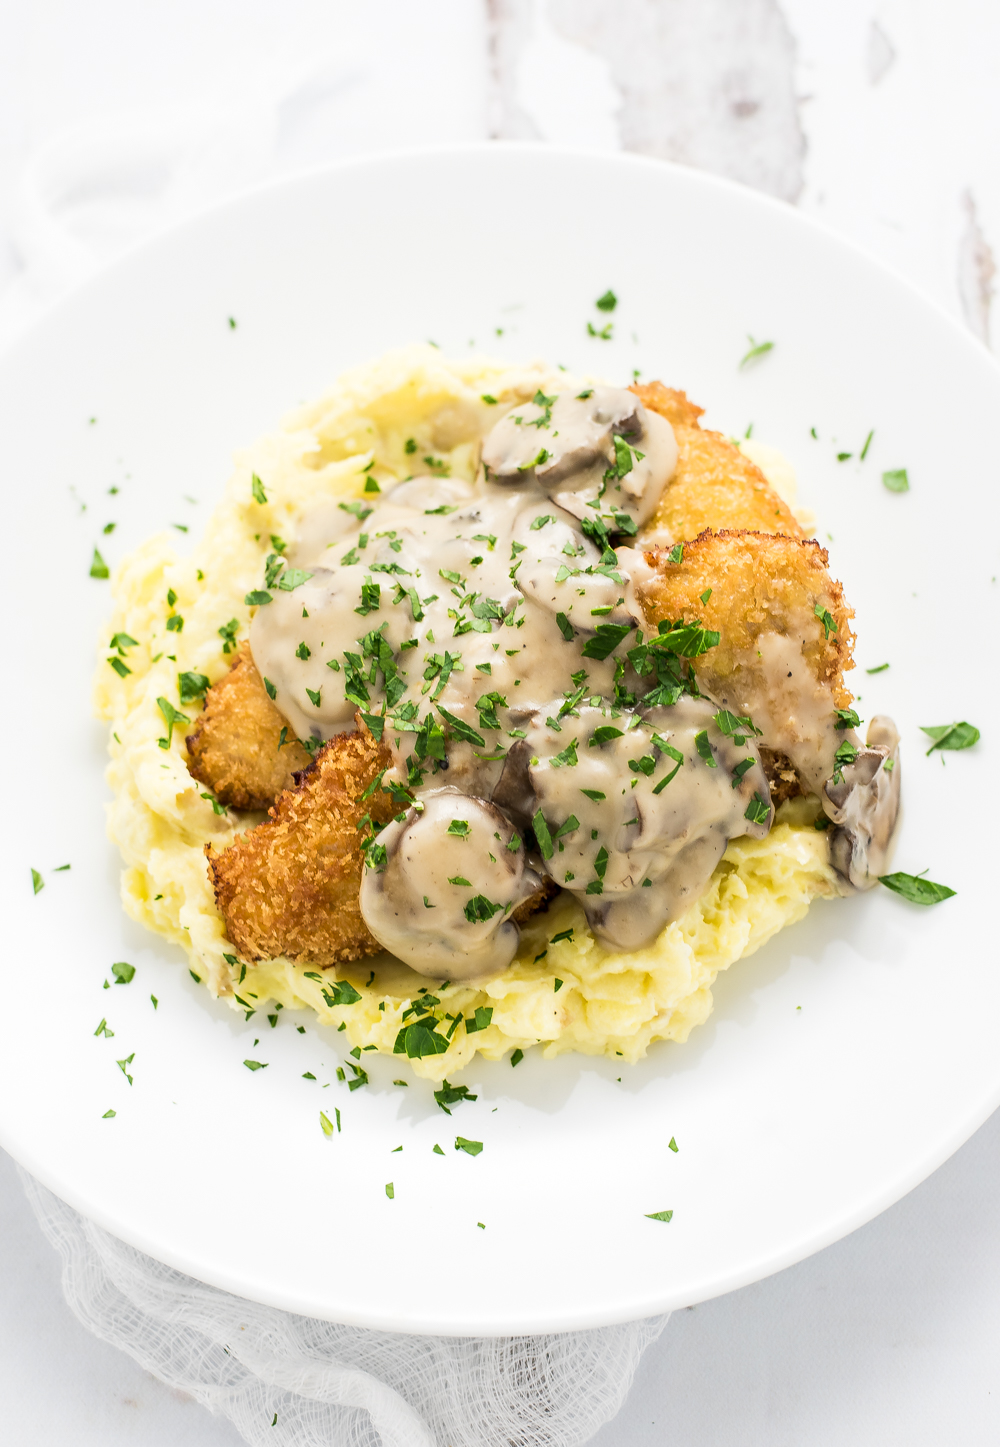 Pork Schnitzel with Mushroom Stout Gravy is a twist on a classic Austrian dish that is loaded with flavor and coated with crispiness!